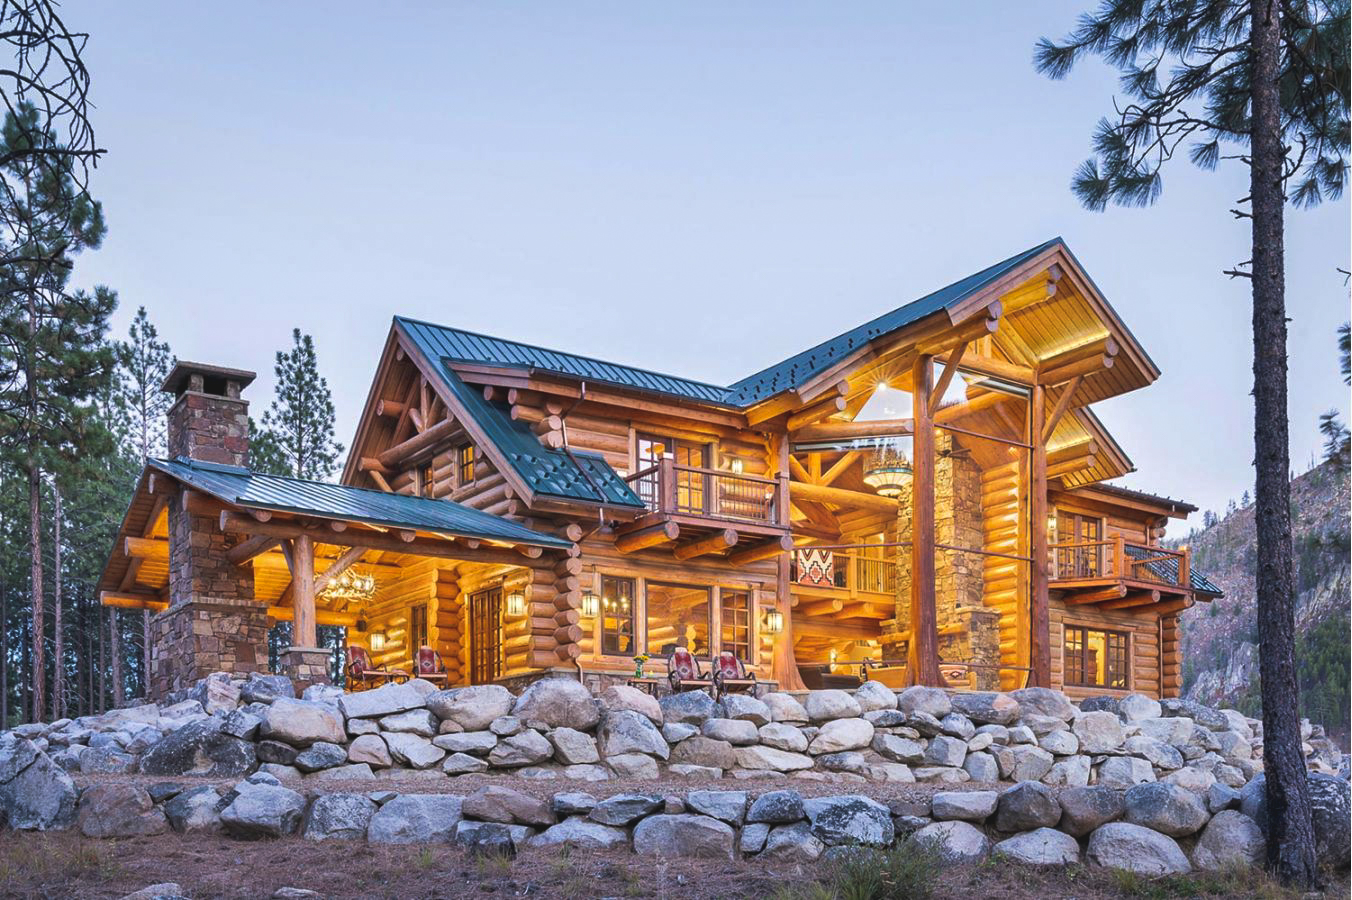 Edgewood Log Homes – Project Highlights